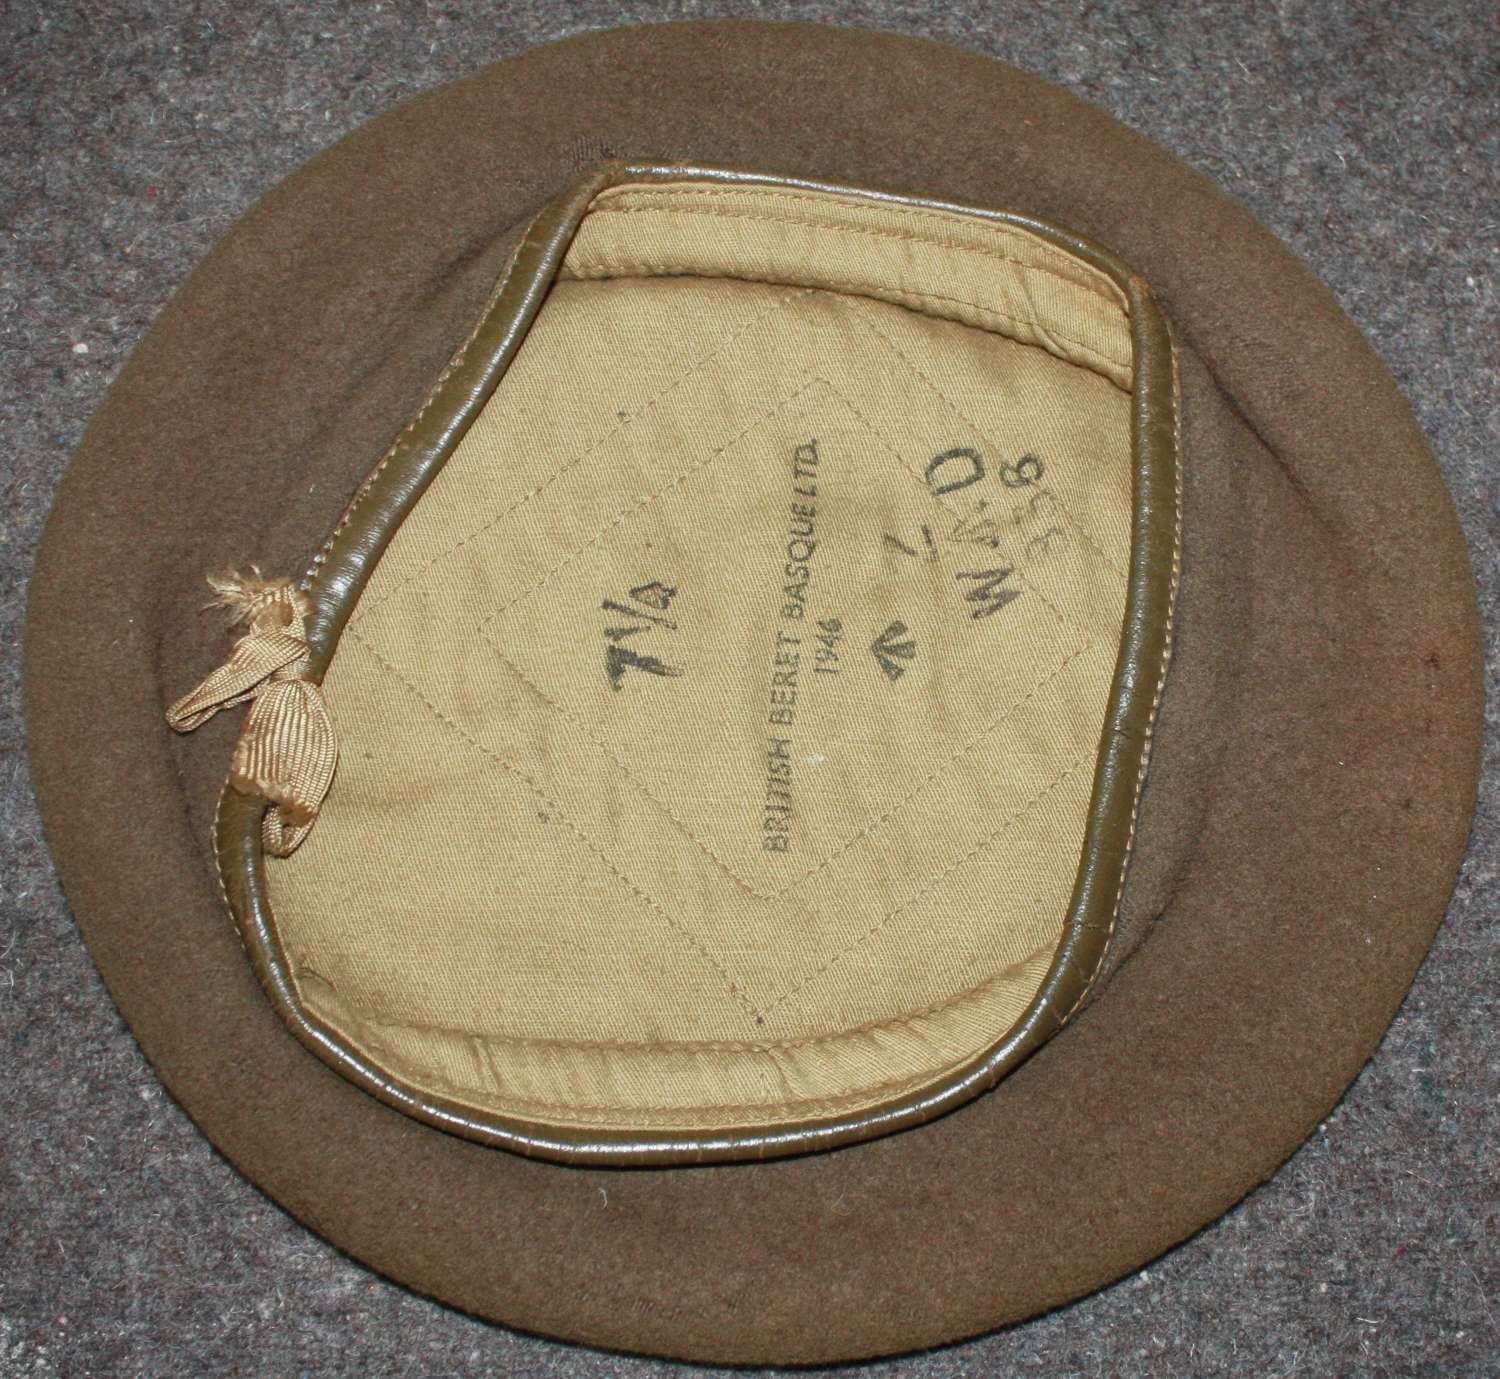 A 1946 DATED GREEN / BROWN BERET USED BY OFFICERS AND RECCE UNITS ETC